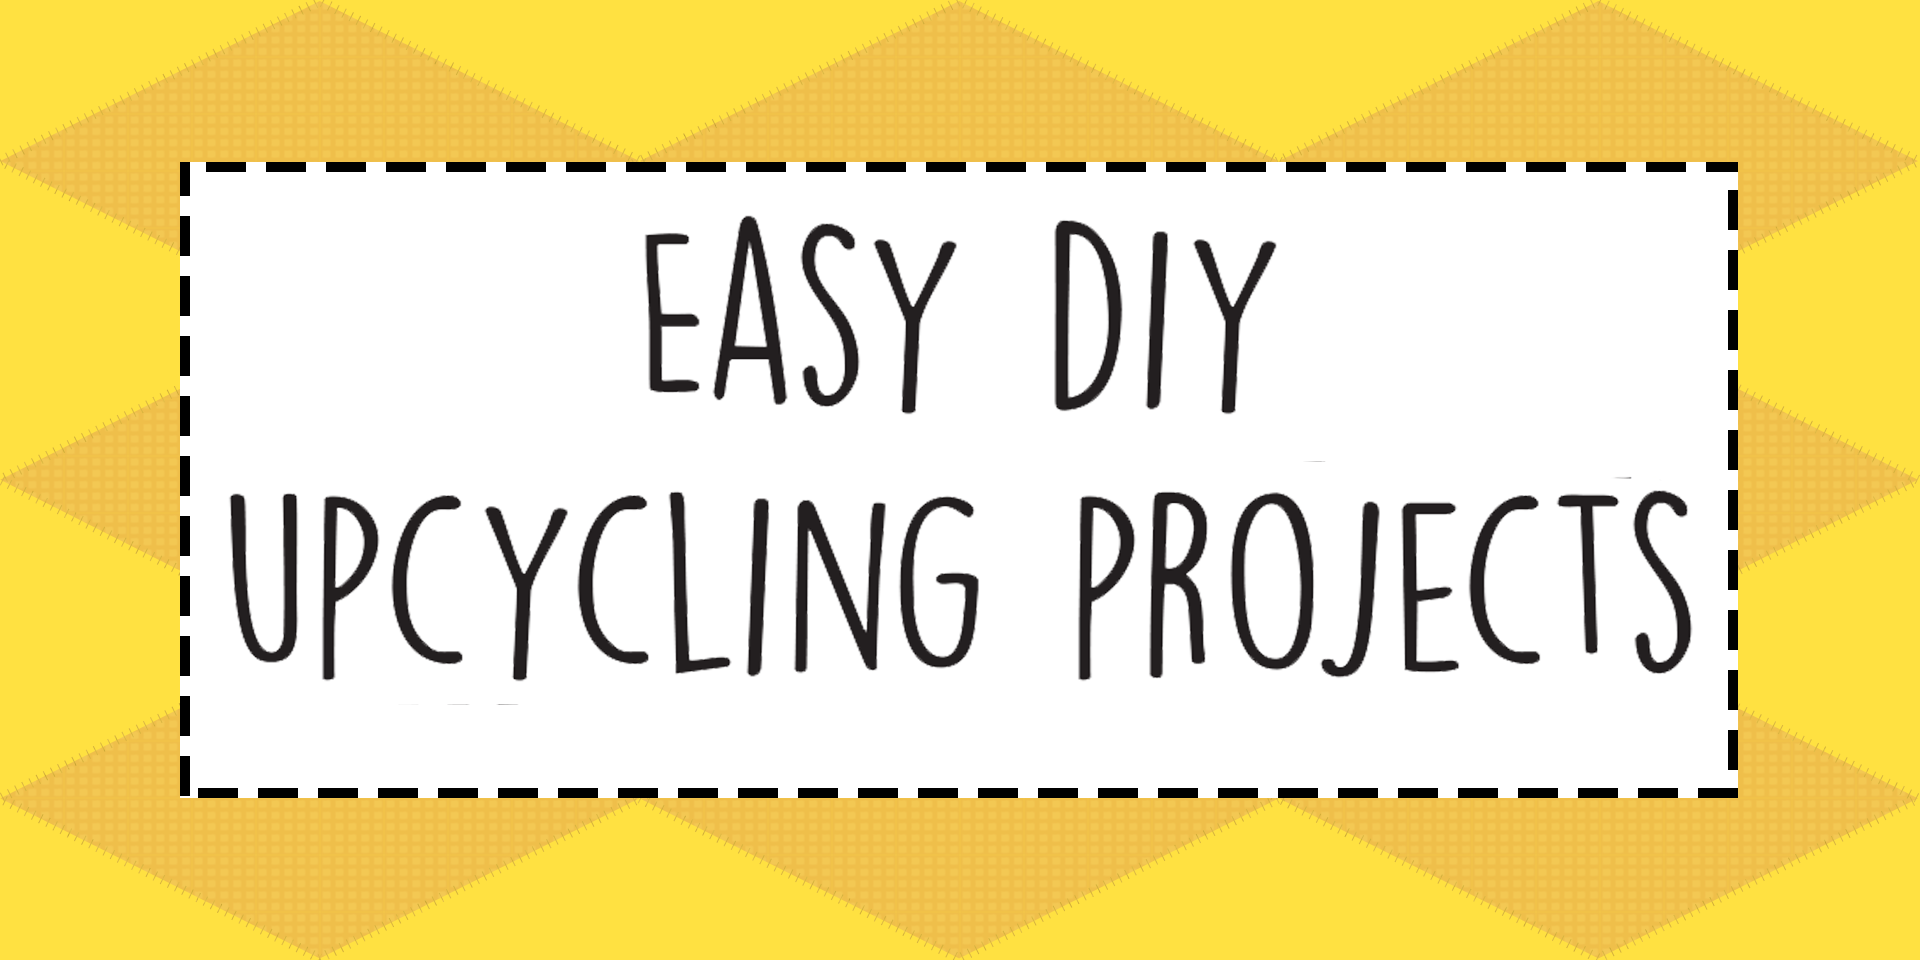 Easy DIY Upcycling Projects